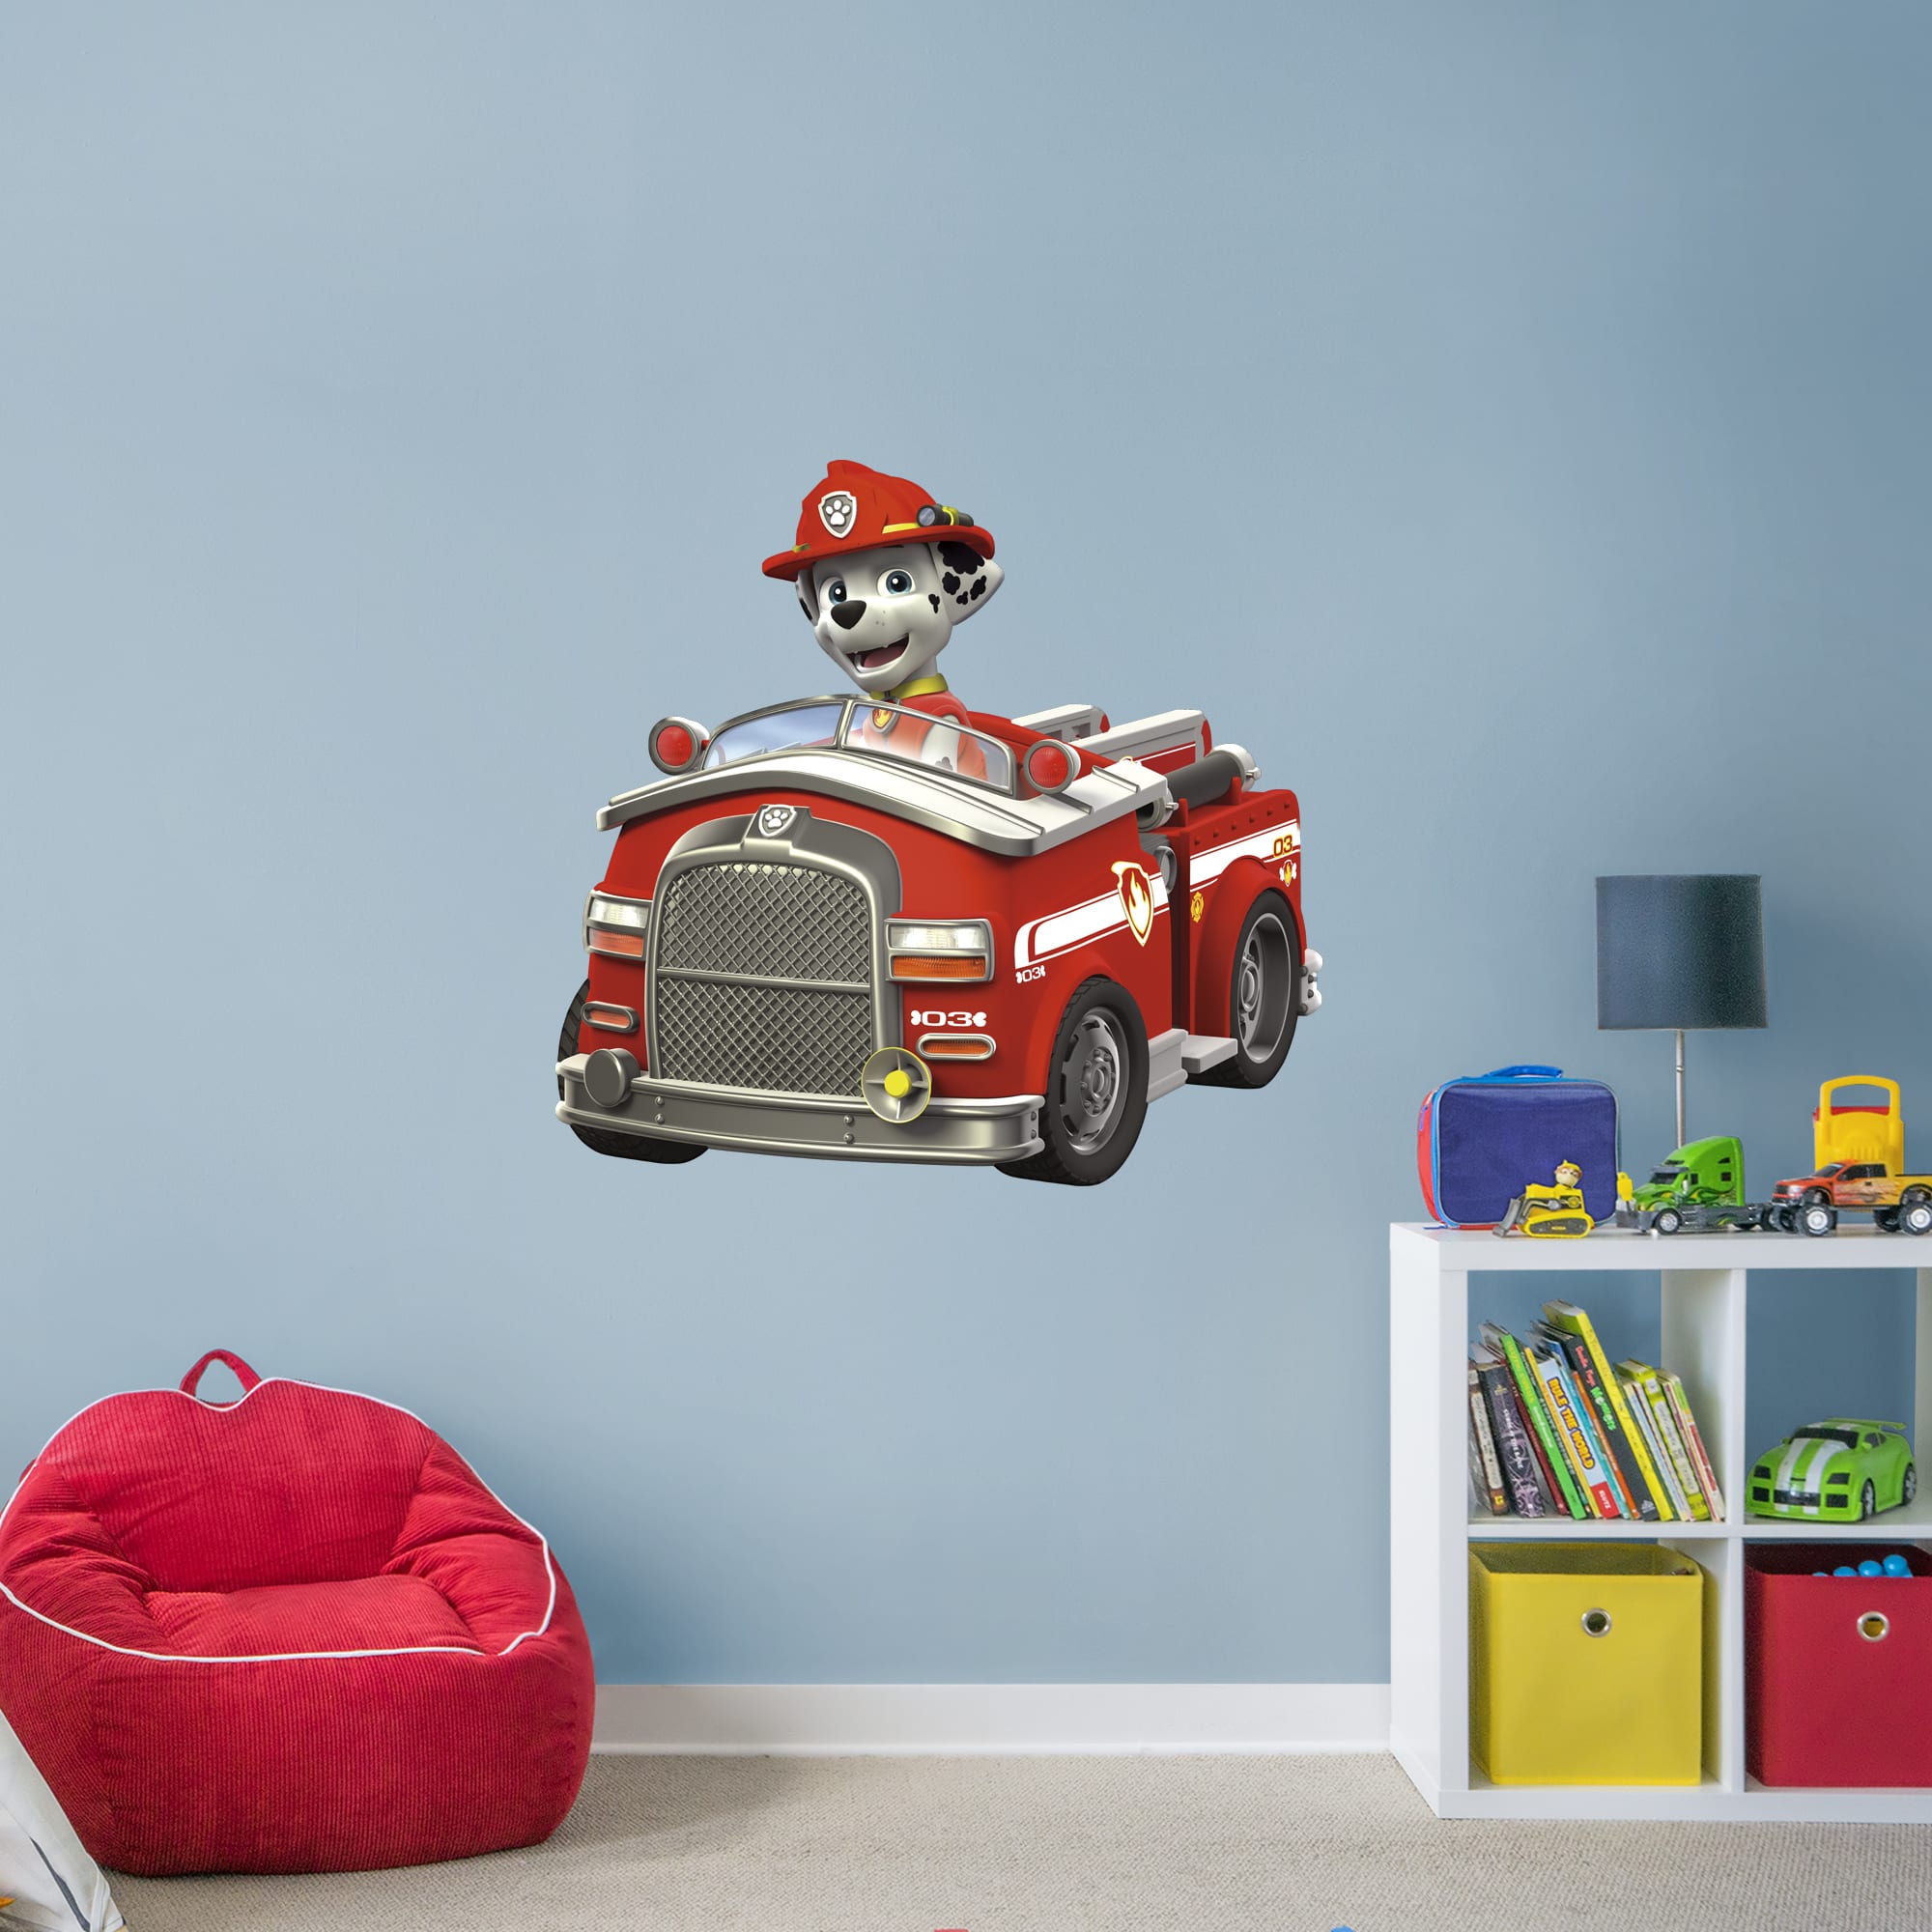 Marshall: Fire Truck - Officially Licensed PAW Patrol Removable Wall Decal Giant Character + 2 Licensed Decals (41"W x 38"H) by